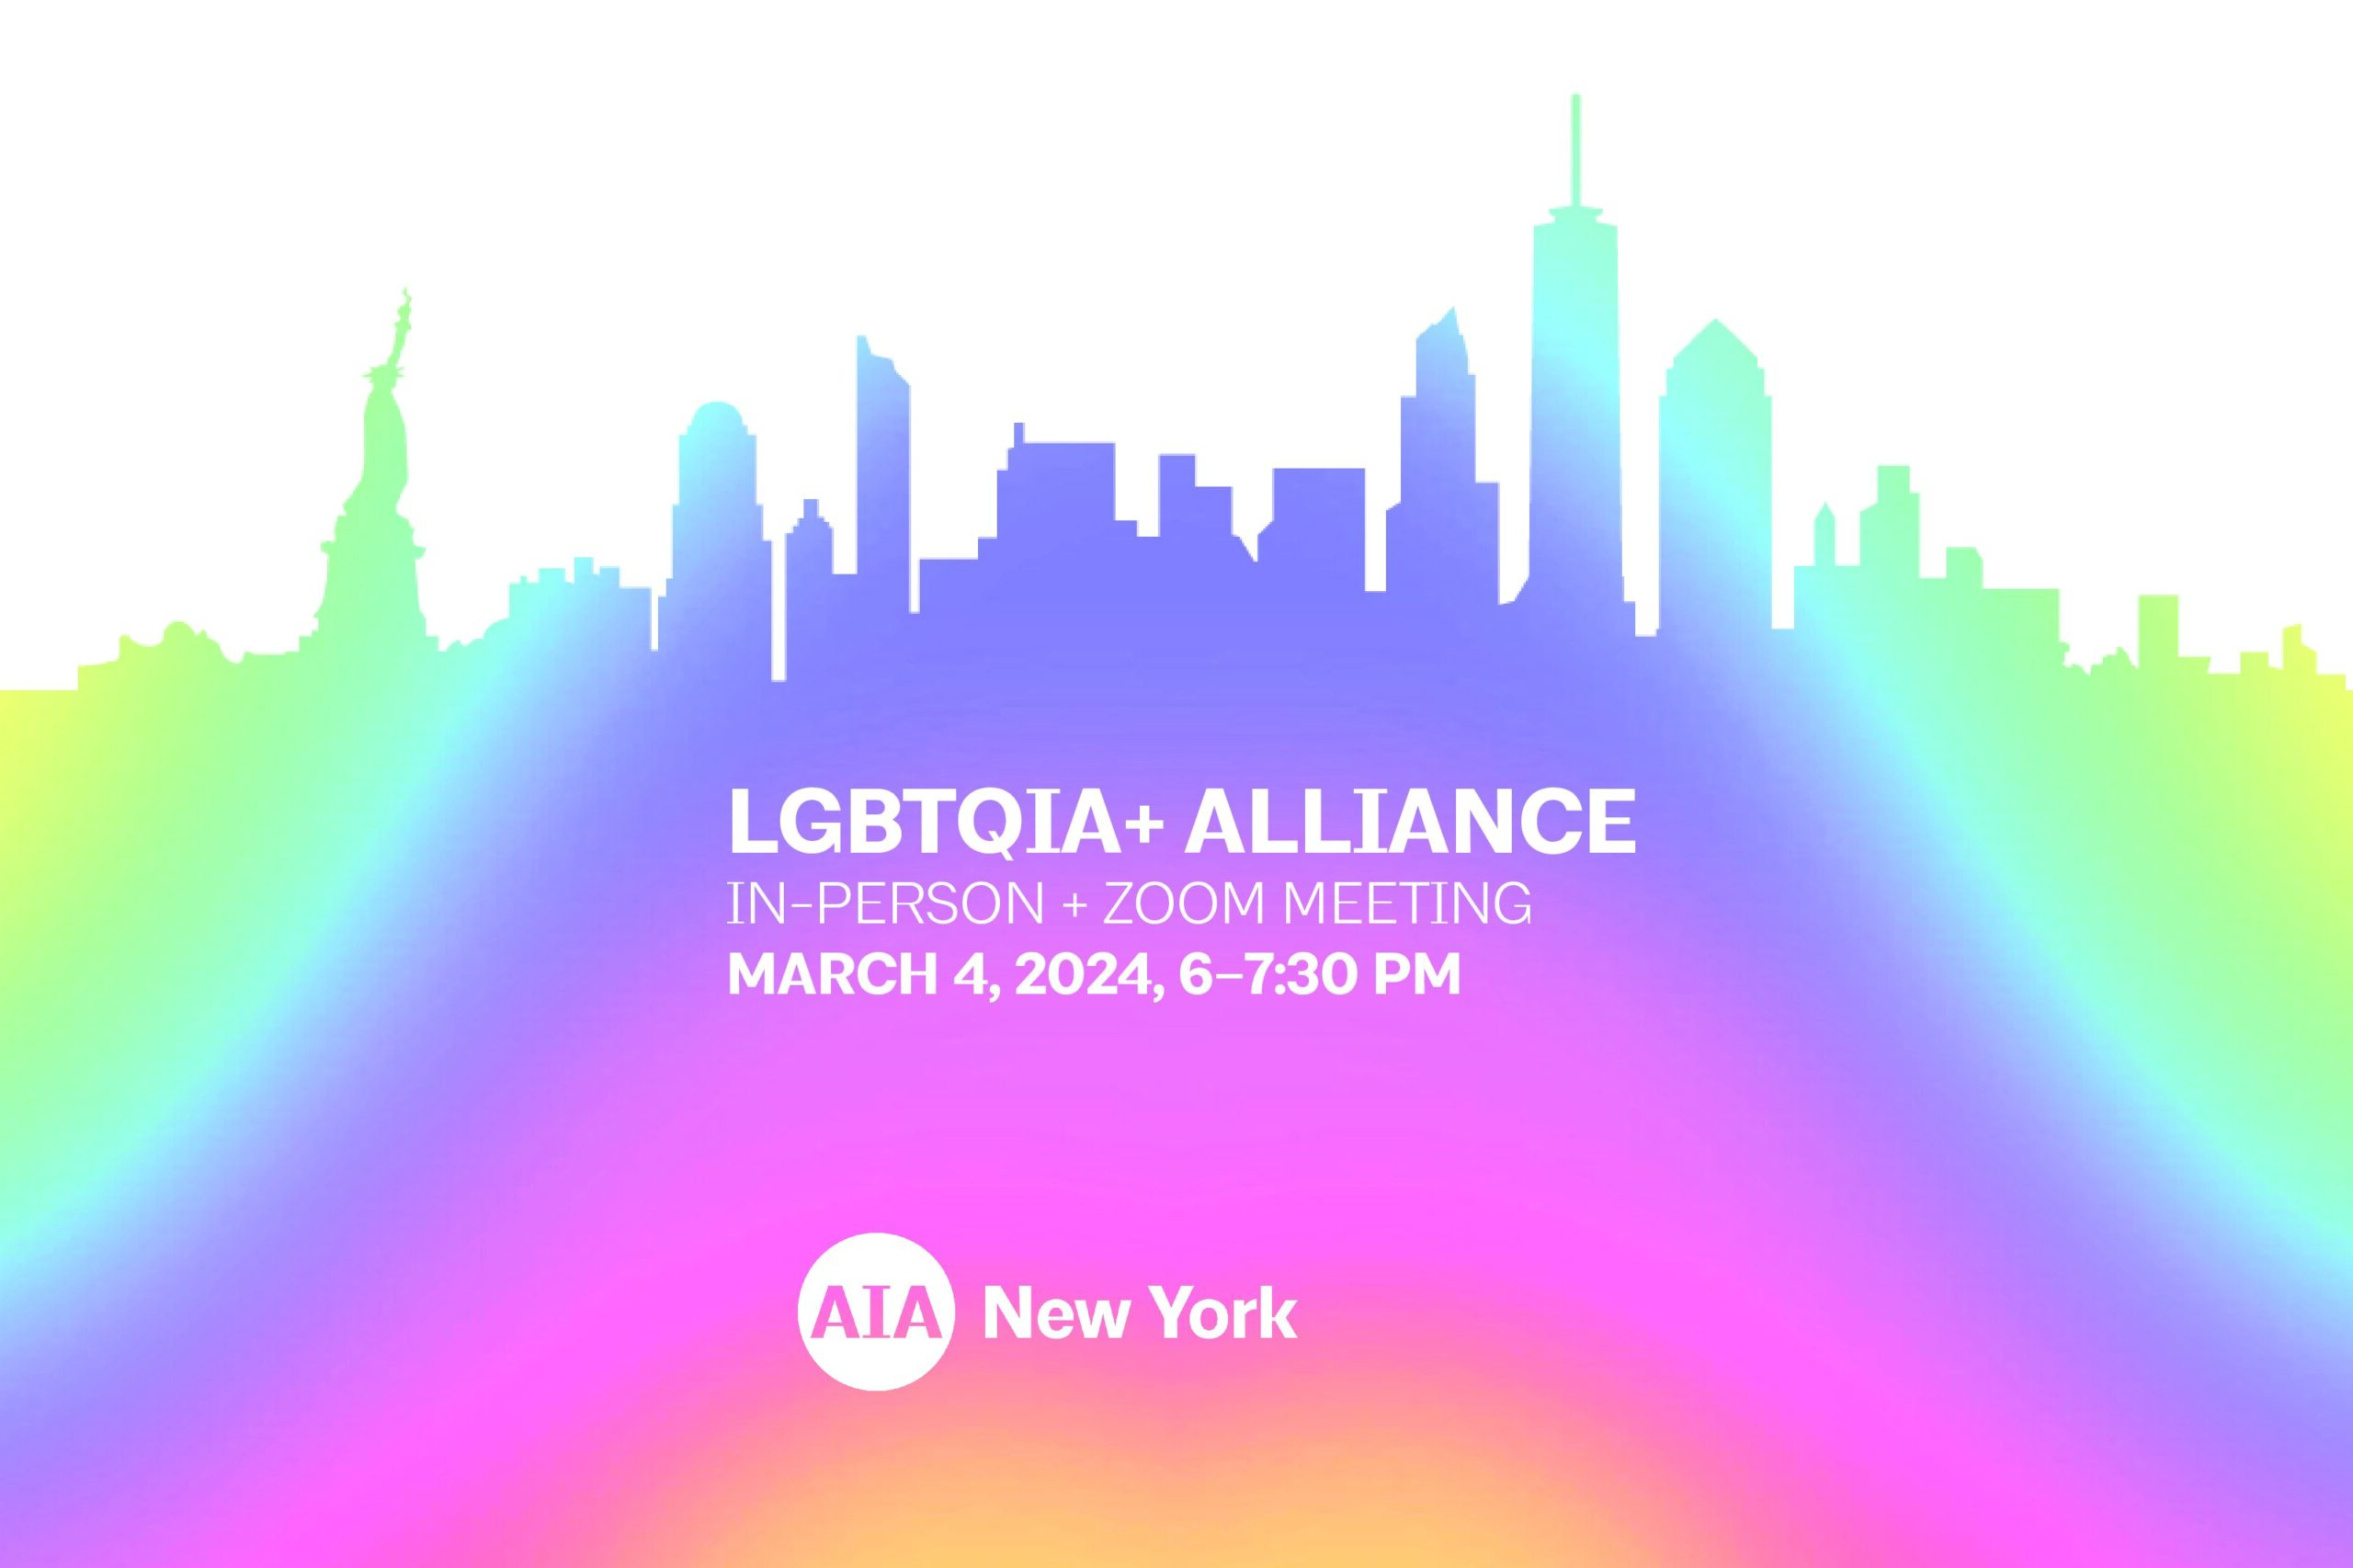 The March flyer for the LGBTQIA meeting.